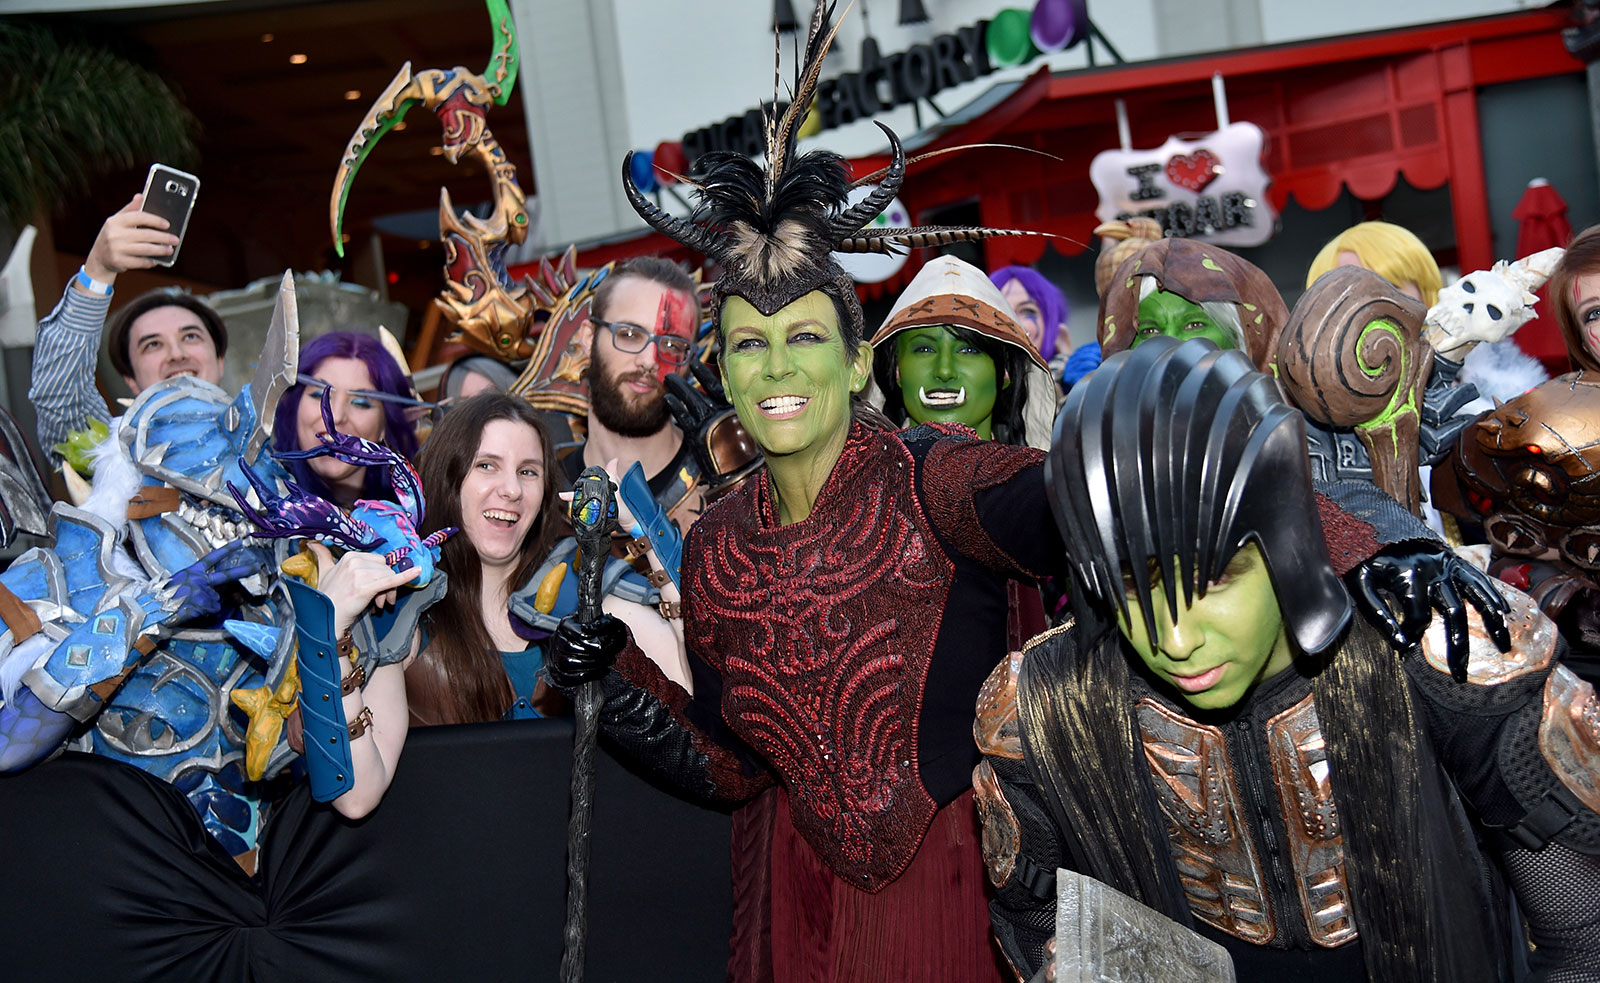 Jamie Lee Curtis Also Cosplayed At The Warcraft Premiere